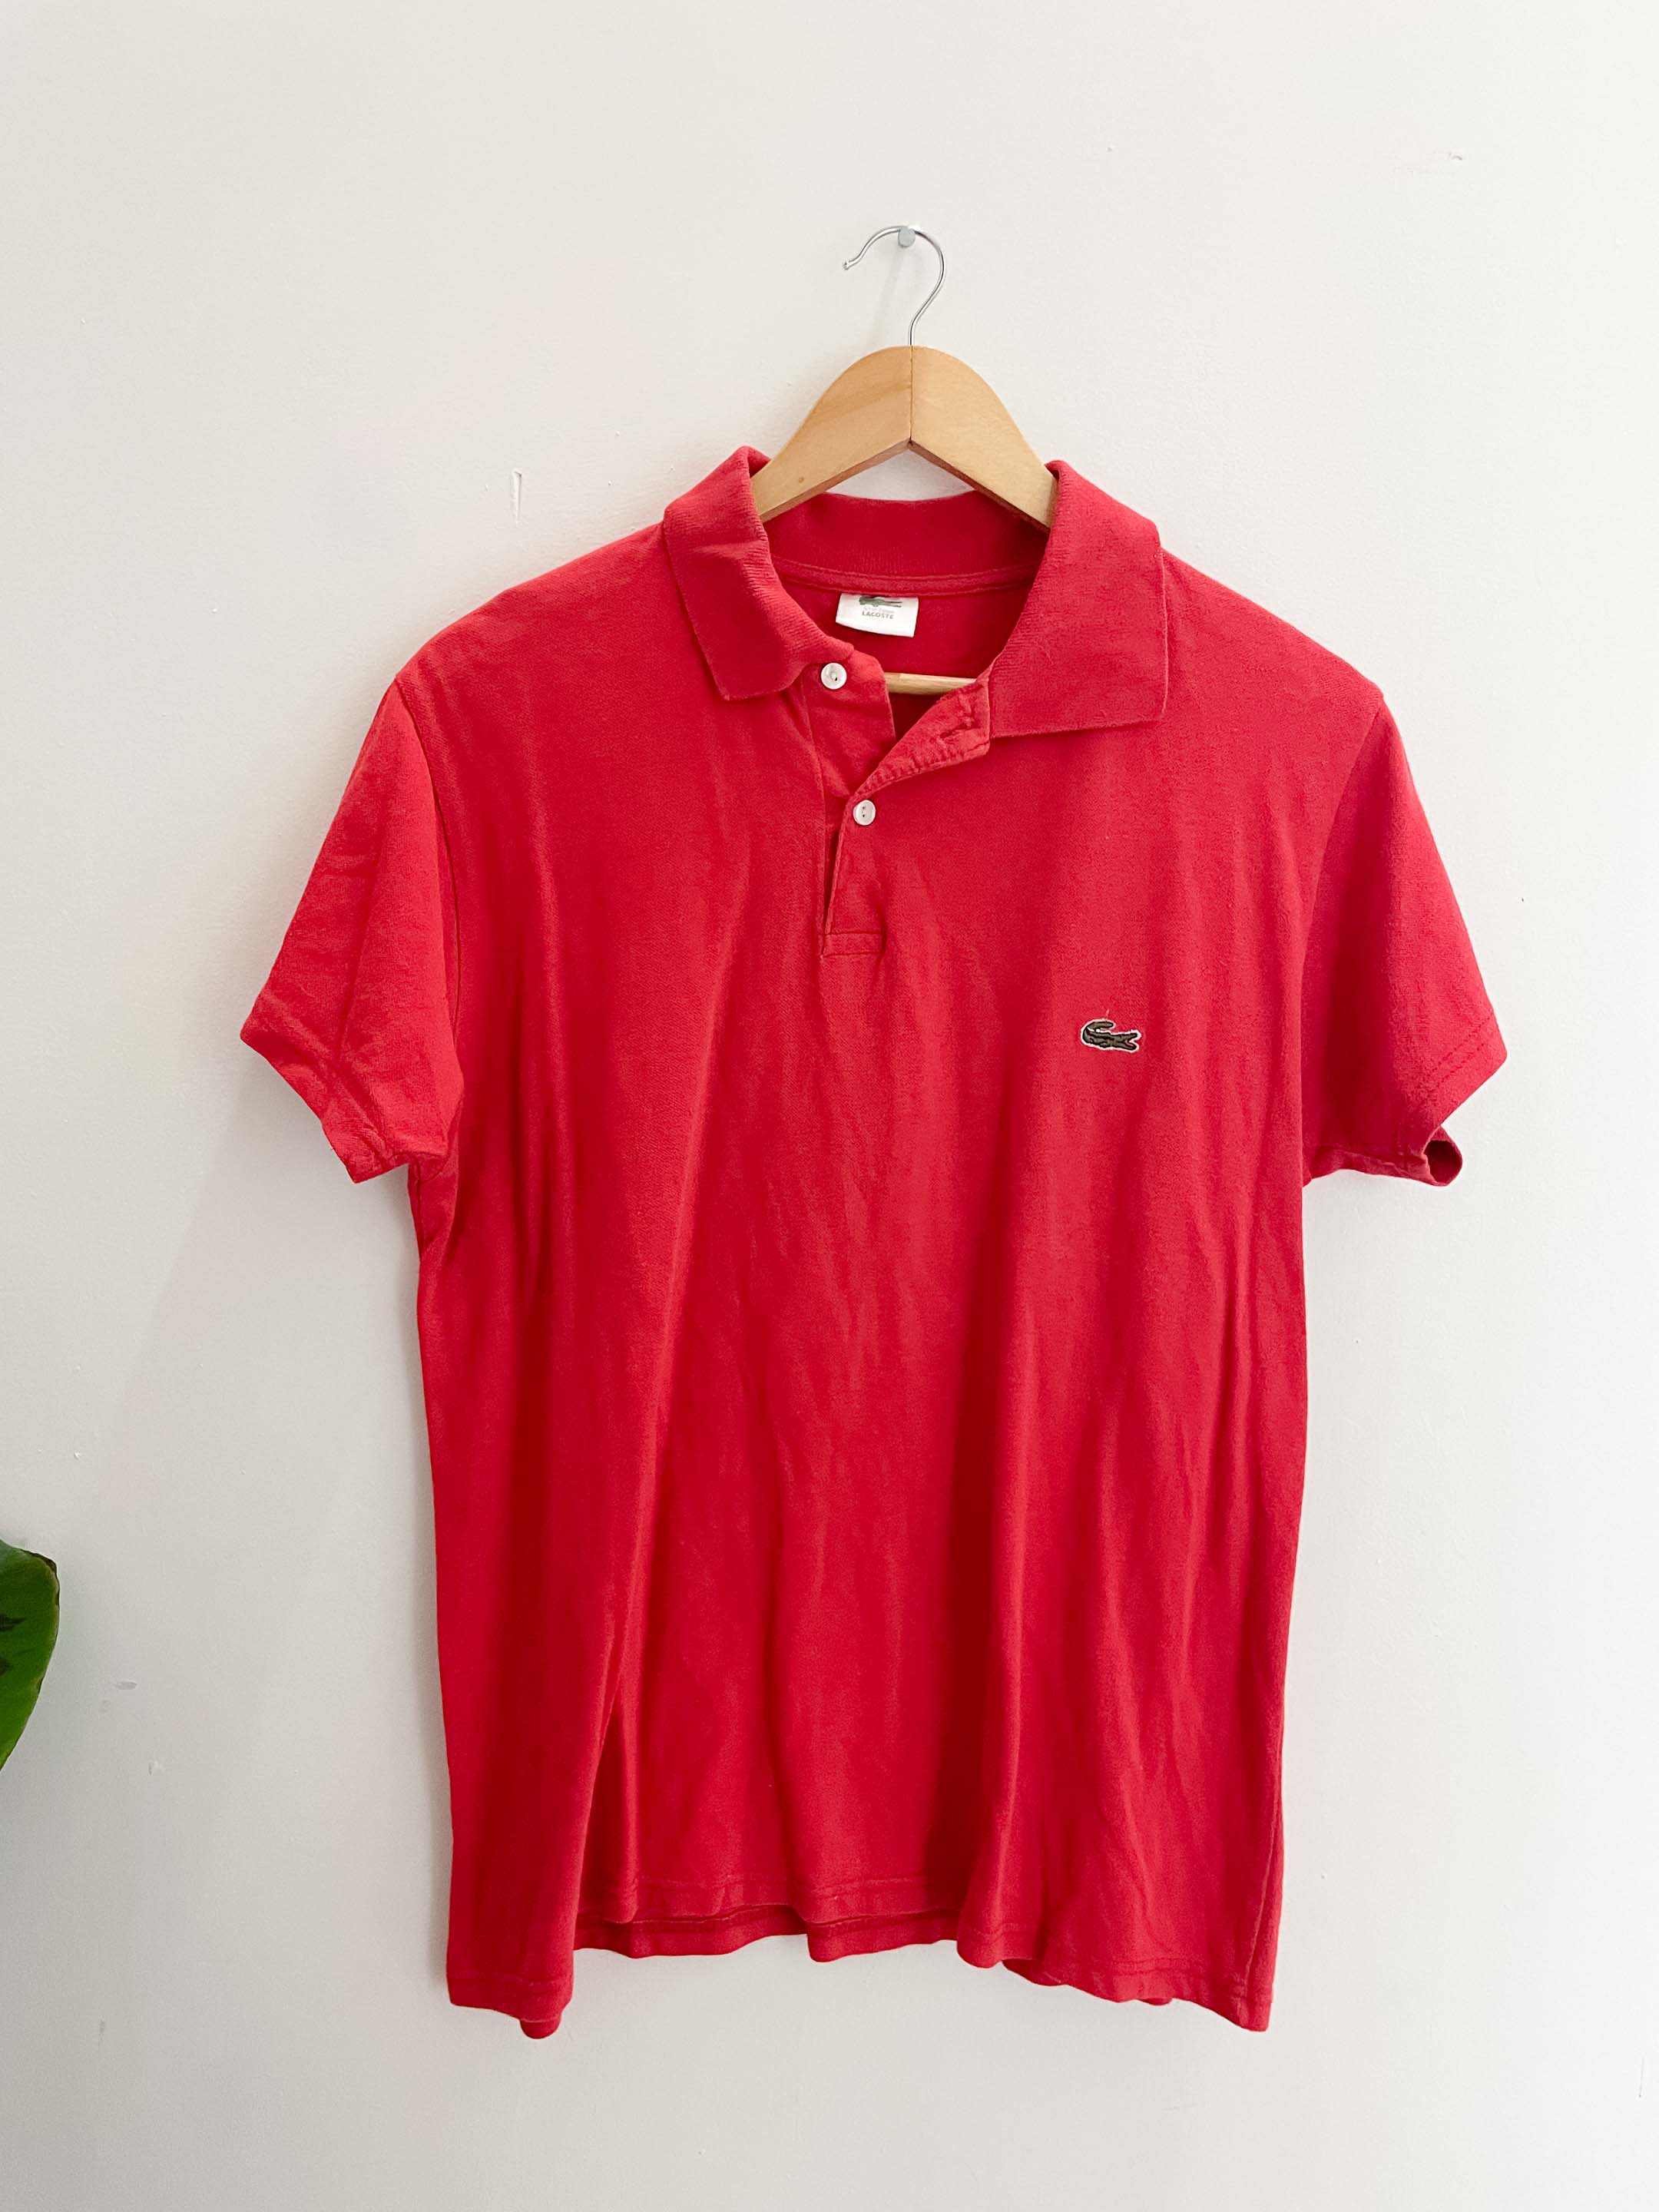 Vintage lacoste 90s red large polo shirt